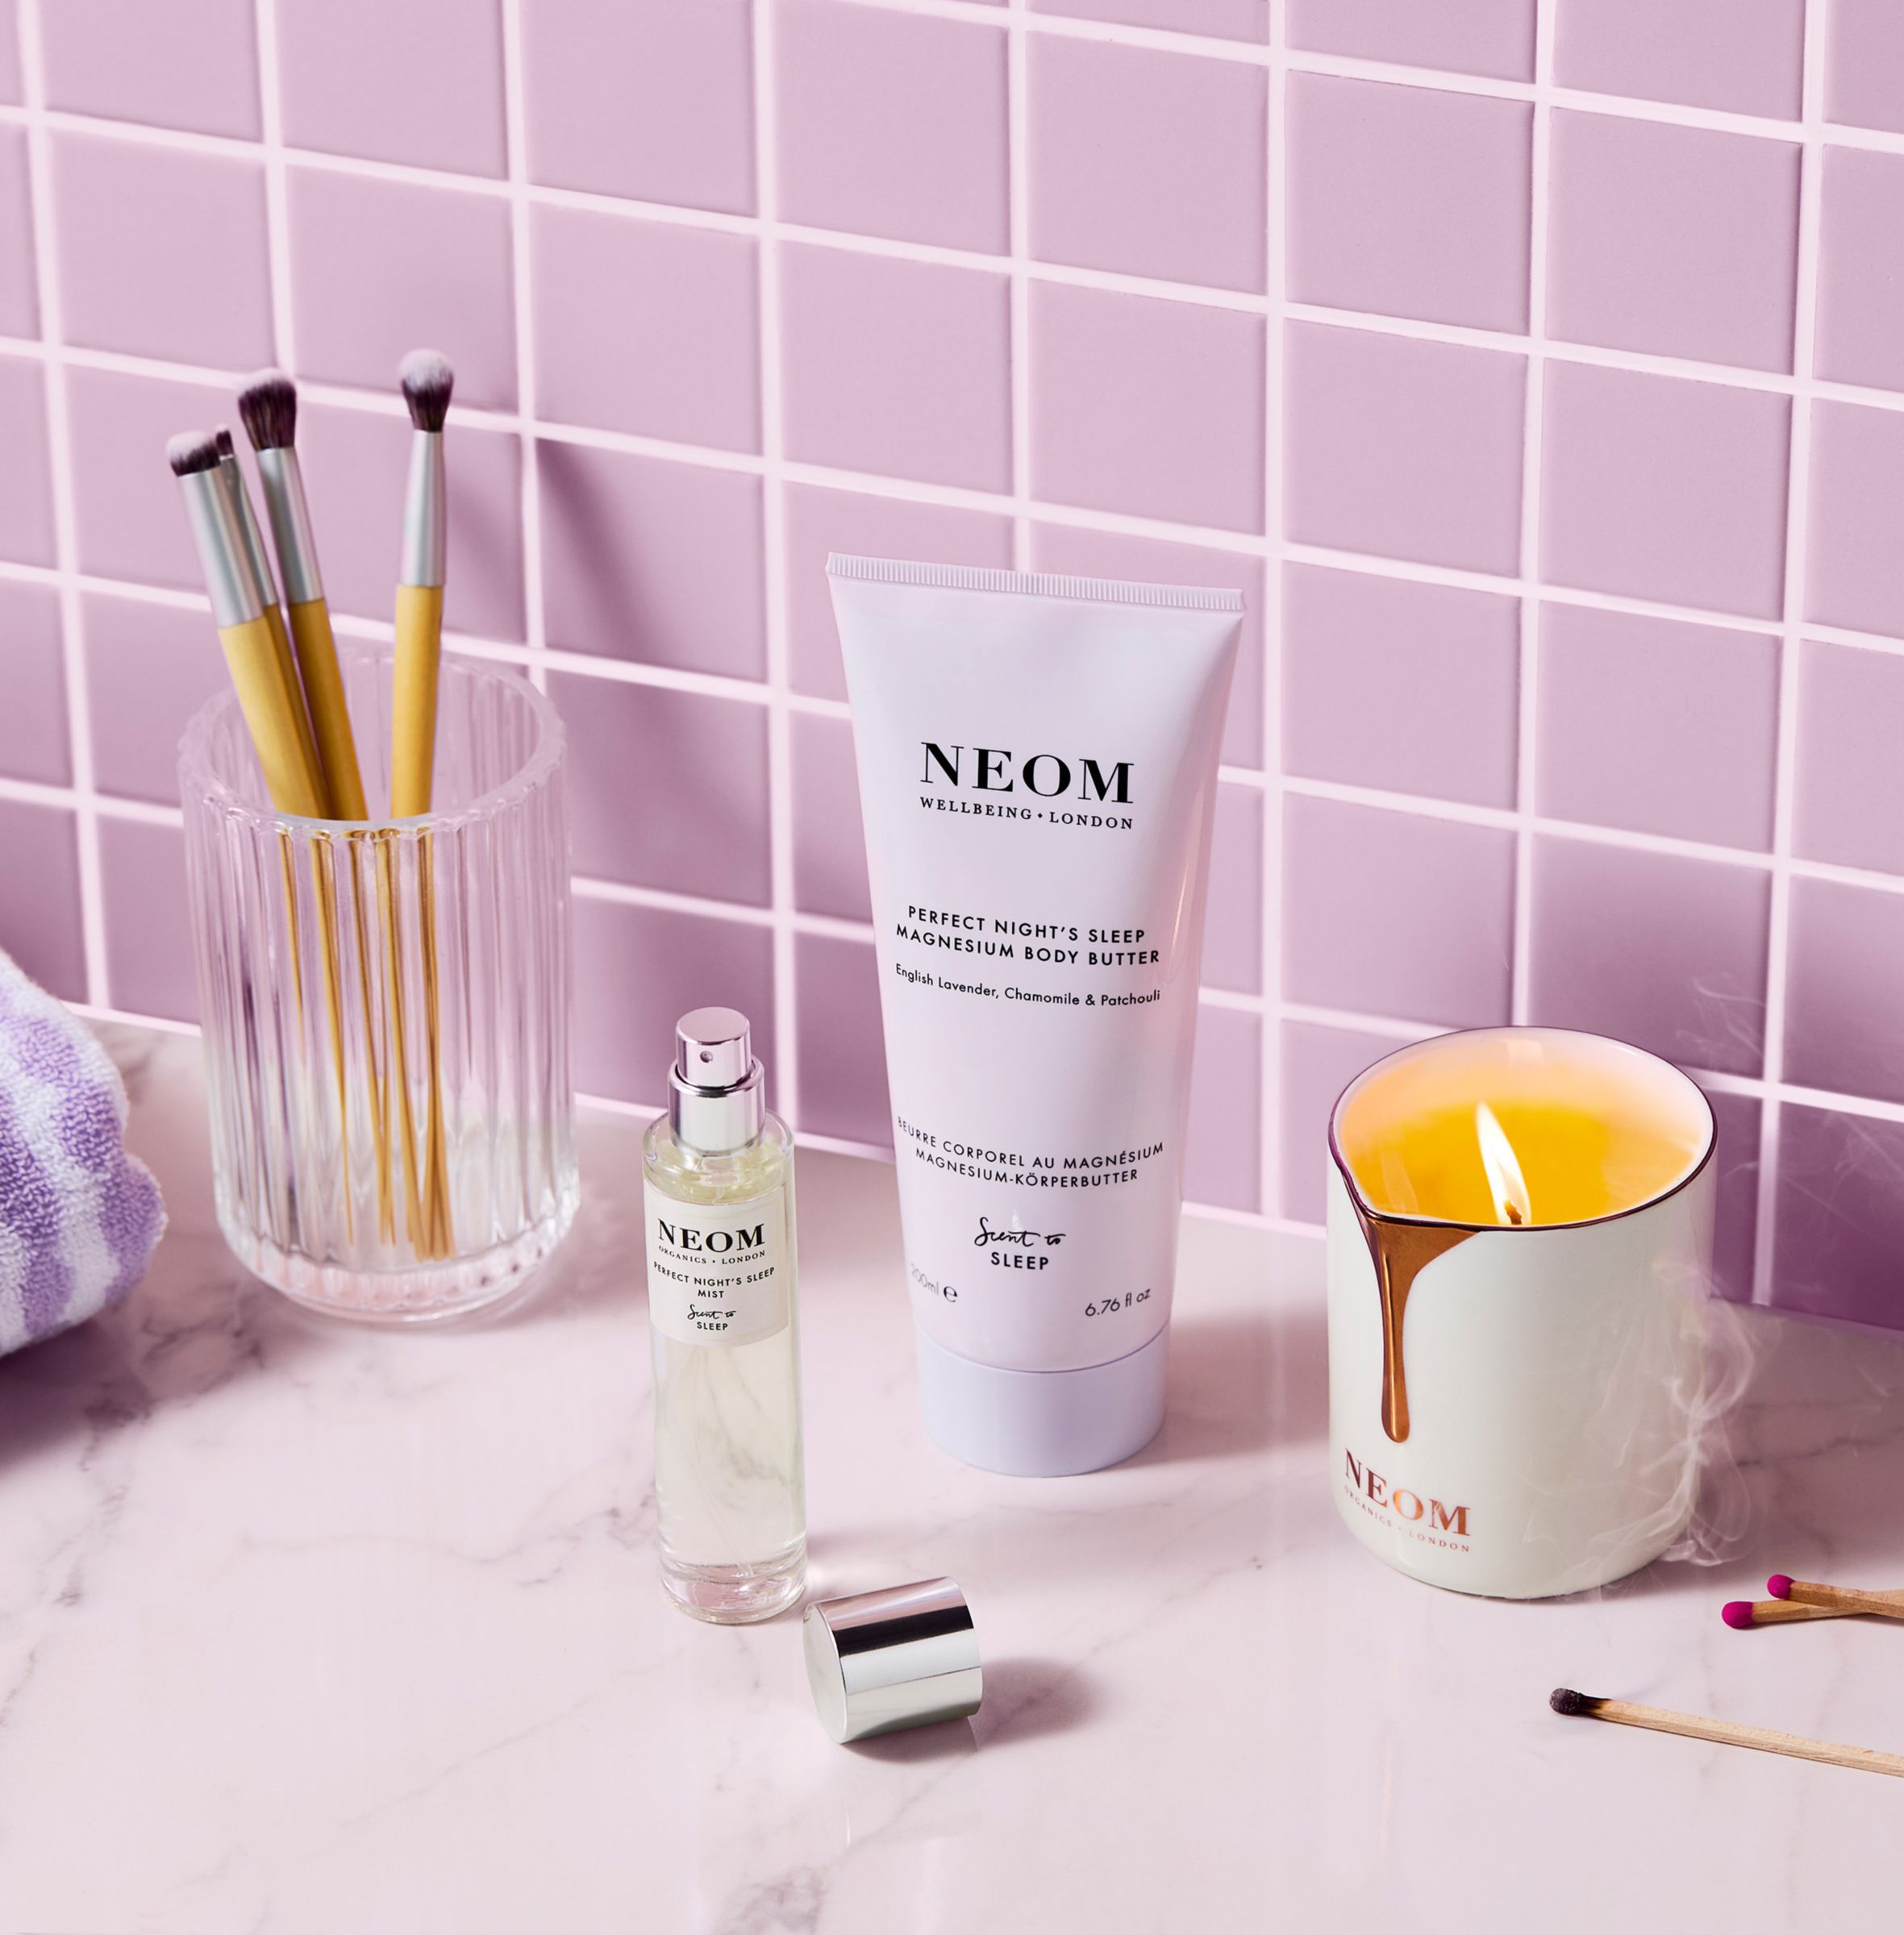 Neom products on a pink background